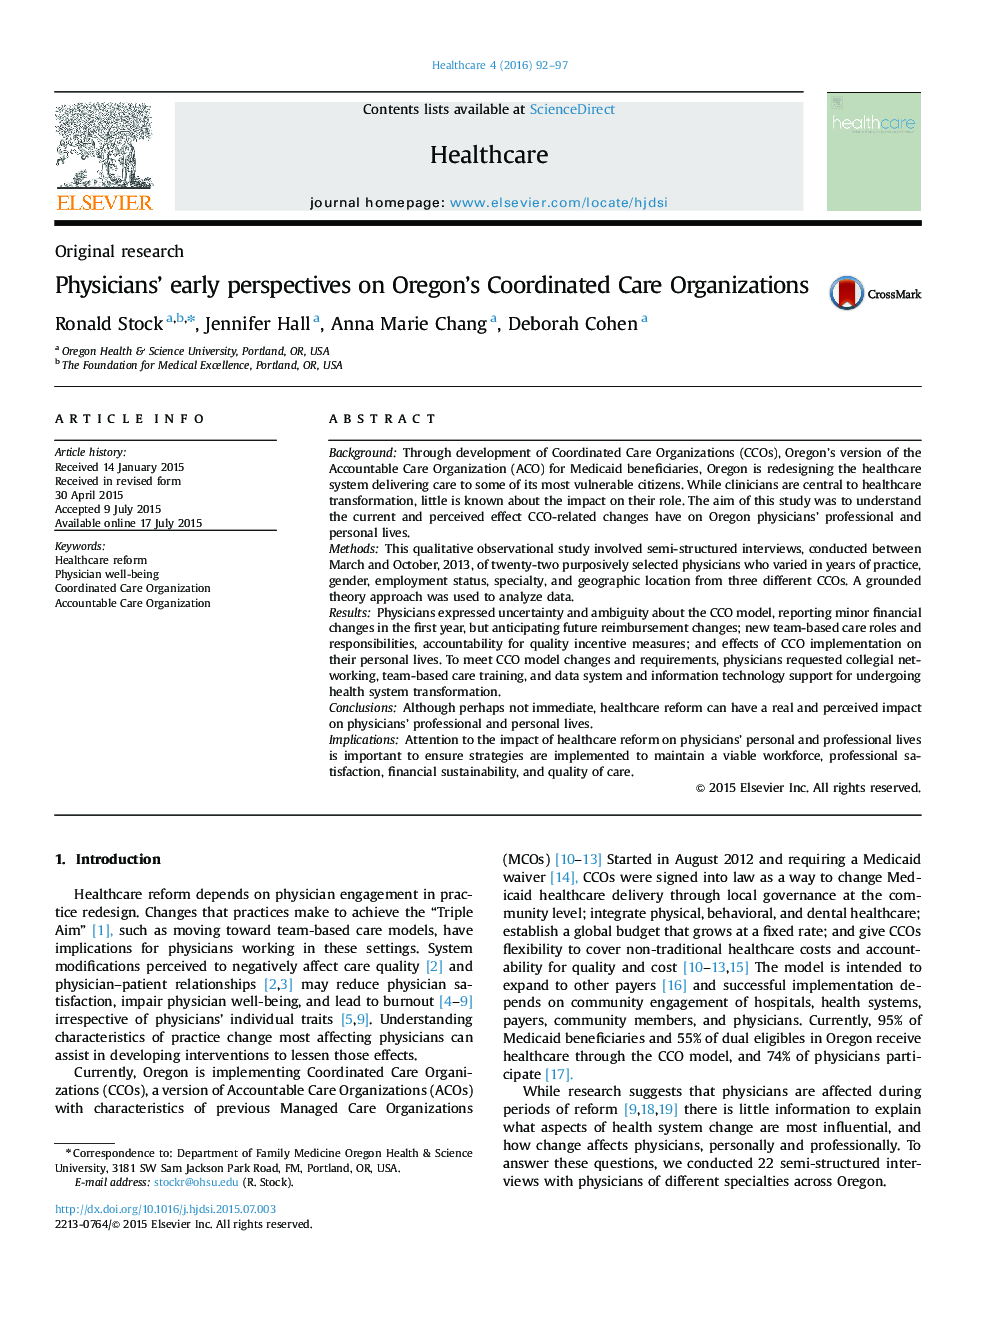 Physicians’ early perspectives on Oregon’s Coordinated Care Organizations